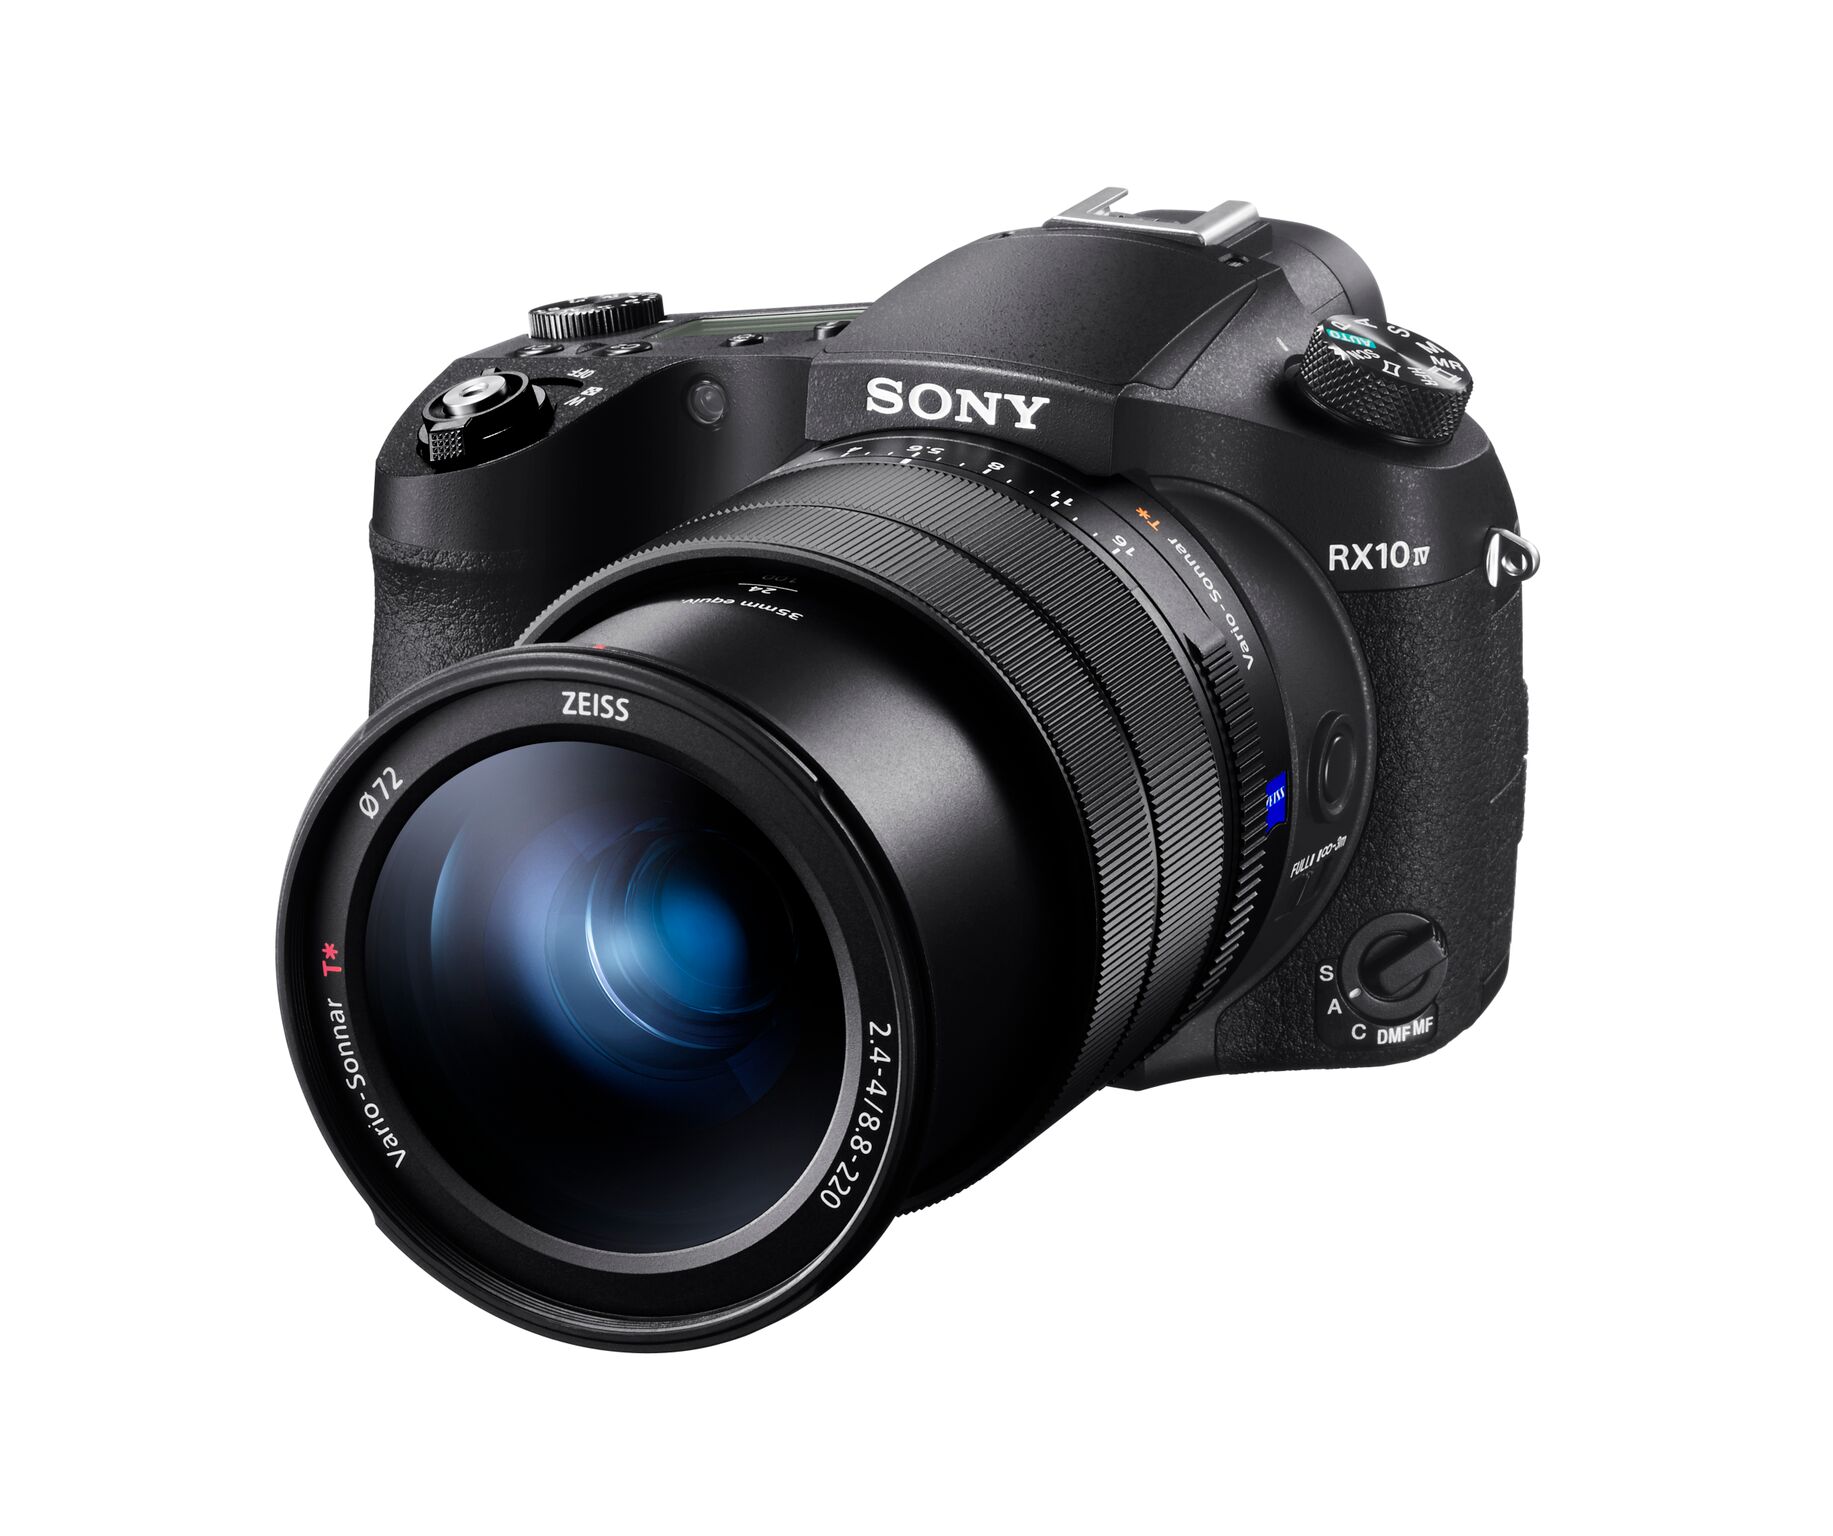 Sony’s New RX10 IV Is Their Most Advanced Fixed Lens Camera Yet